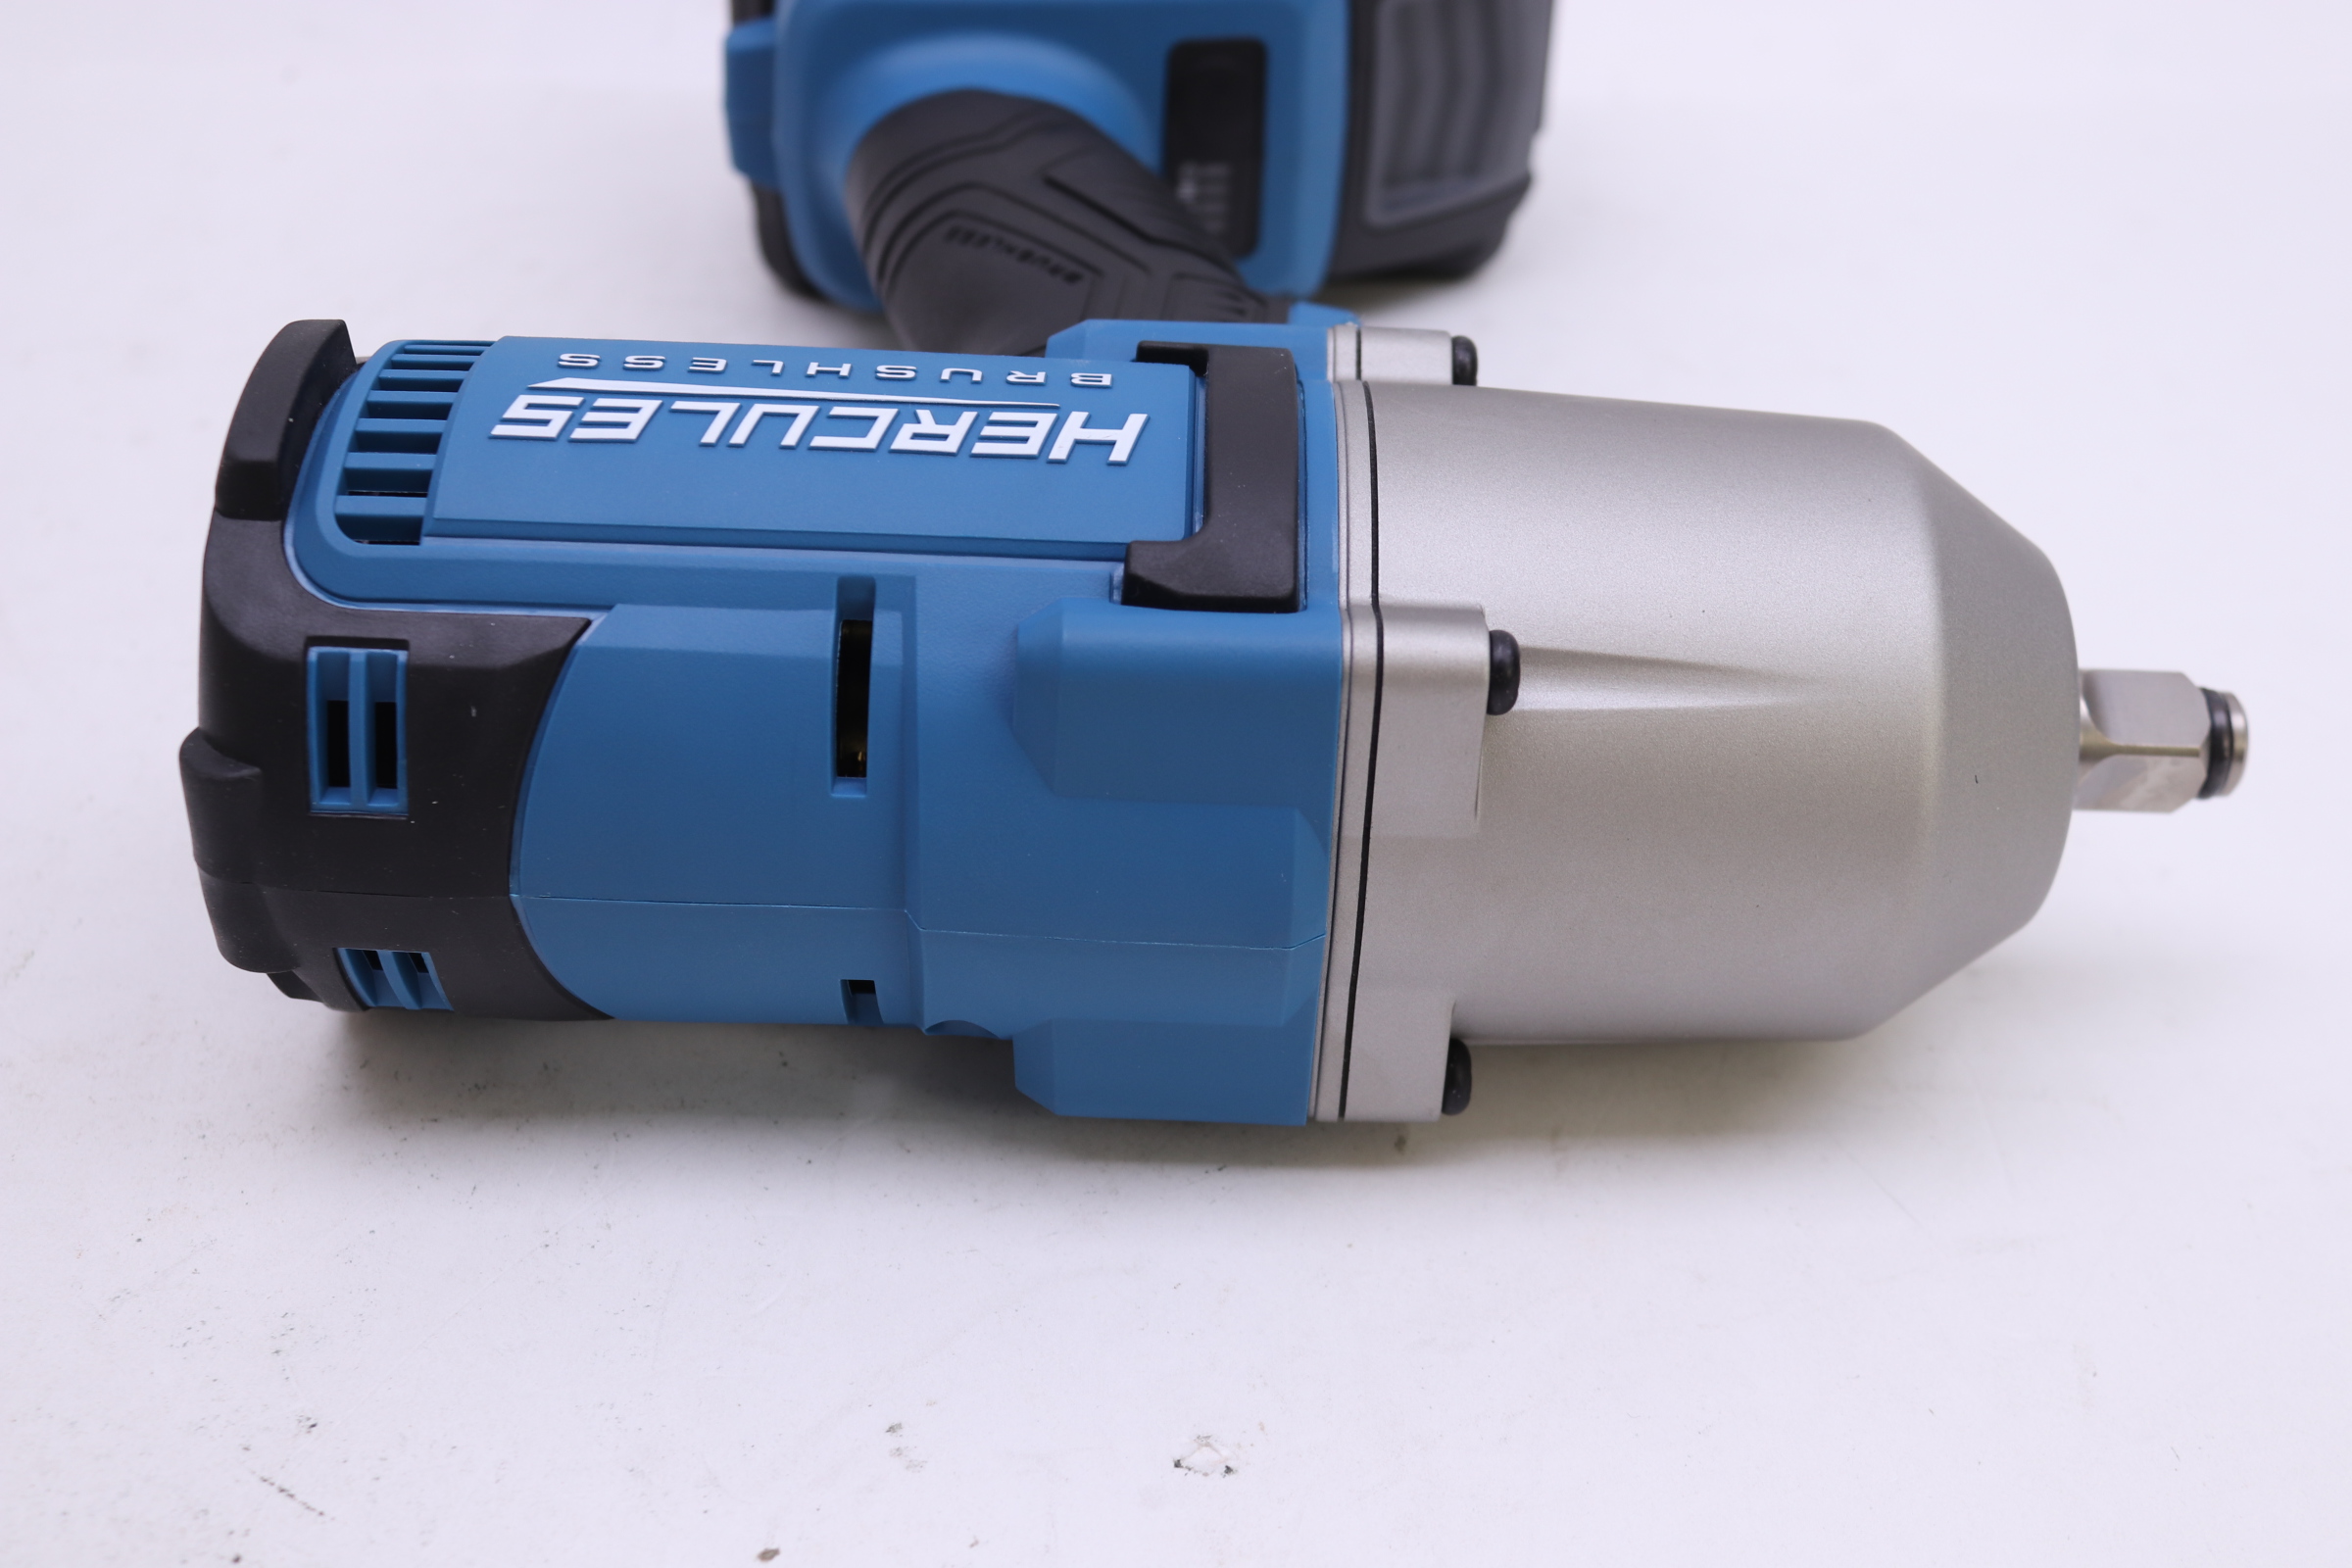 20V Brushless Cordless 1/2 in. High-Torque Impact Wrench - Tool Only